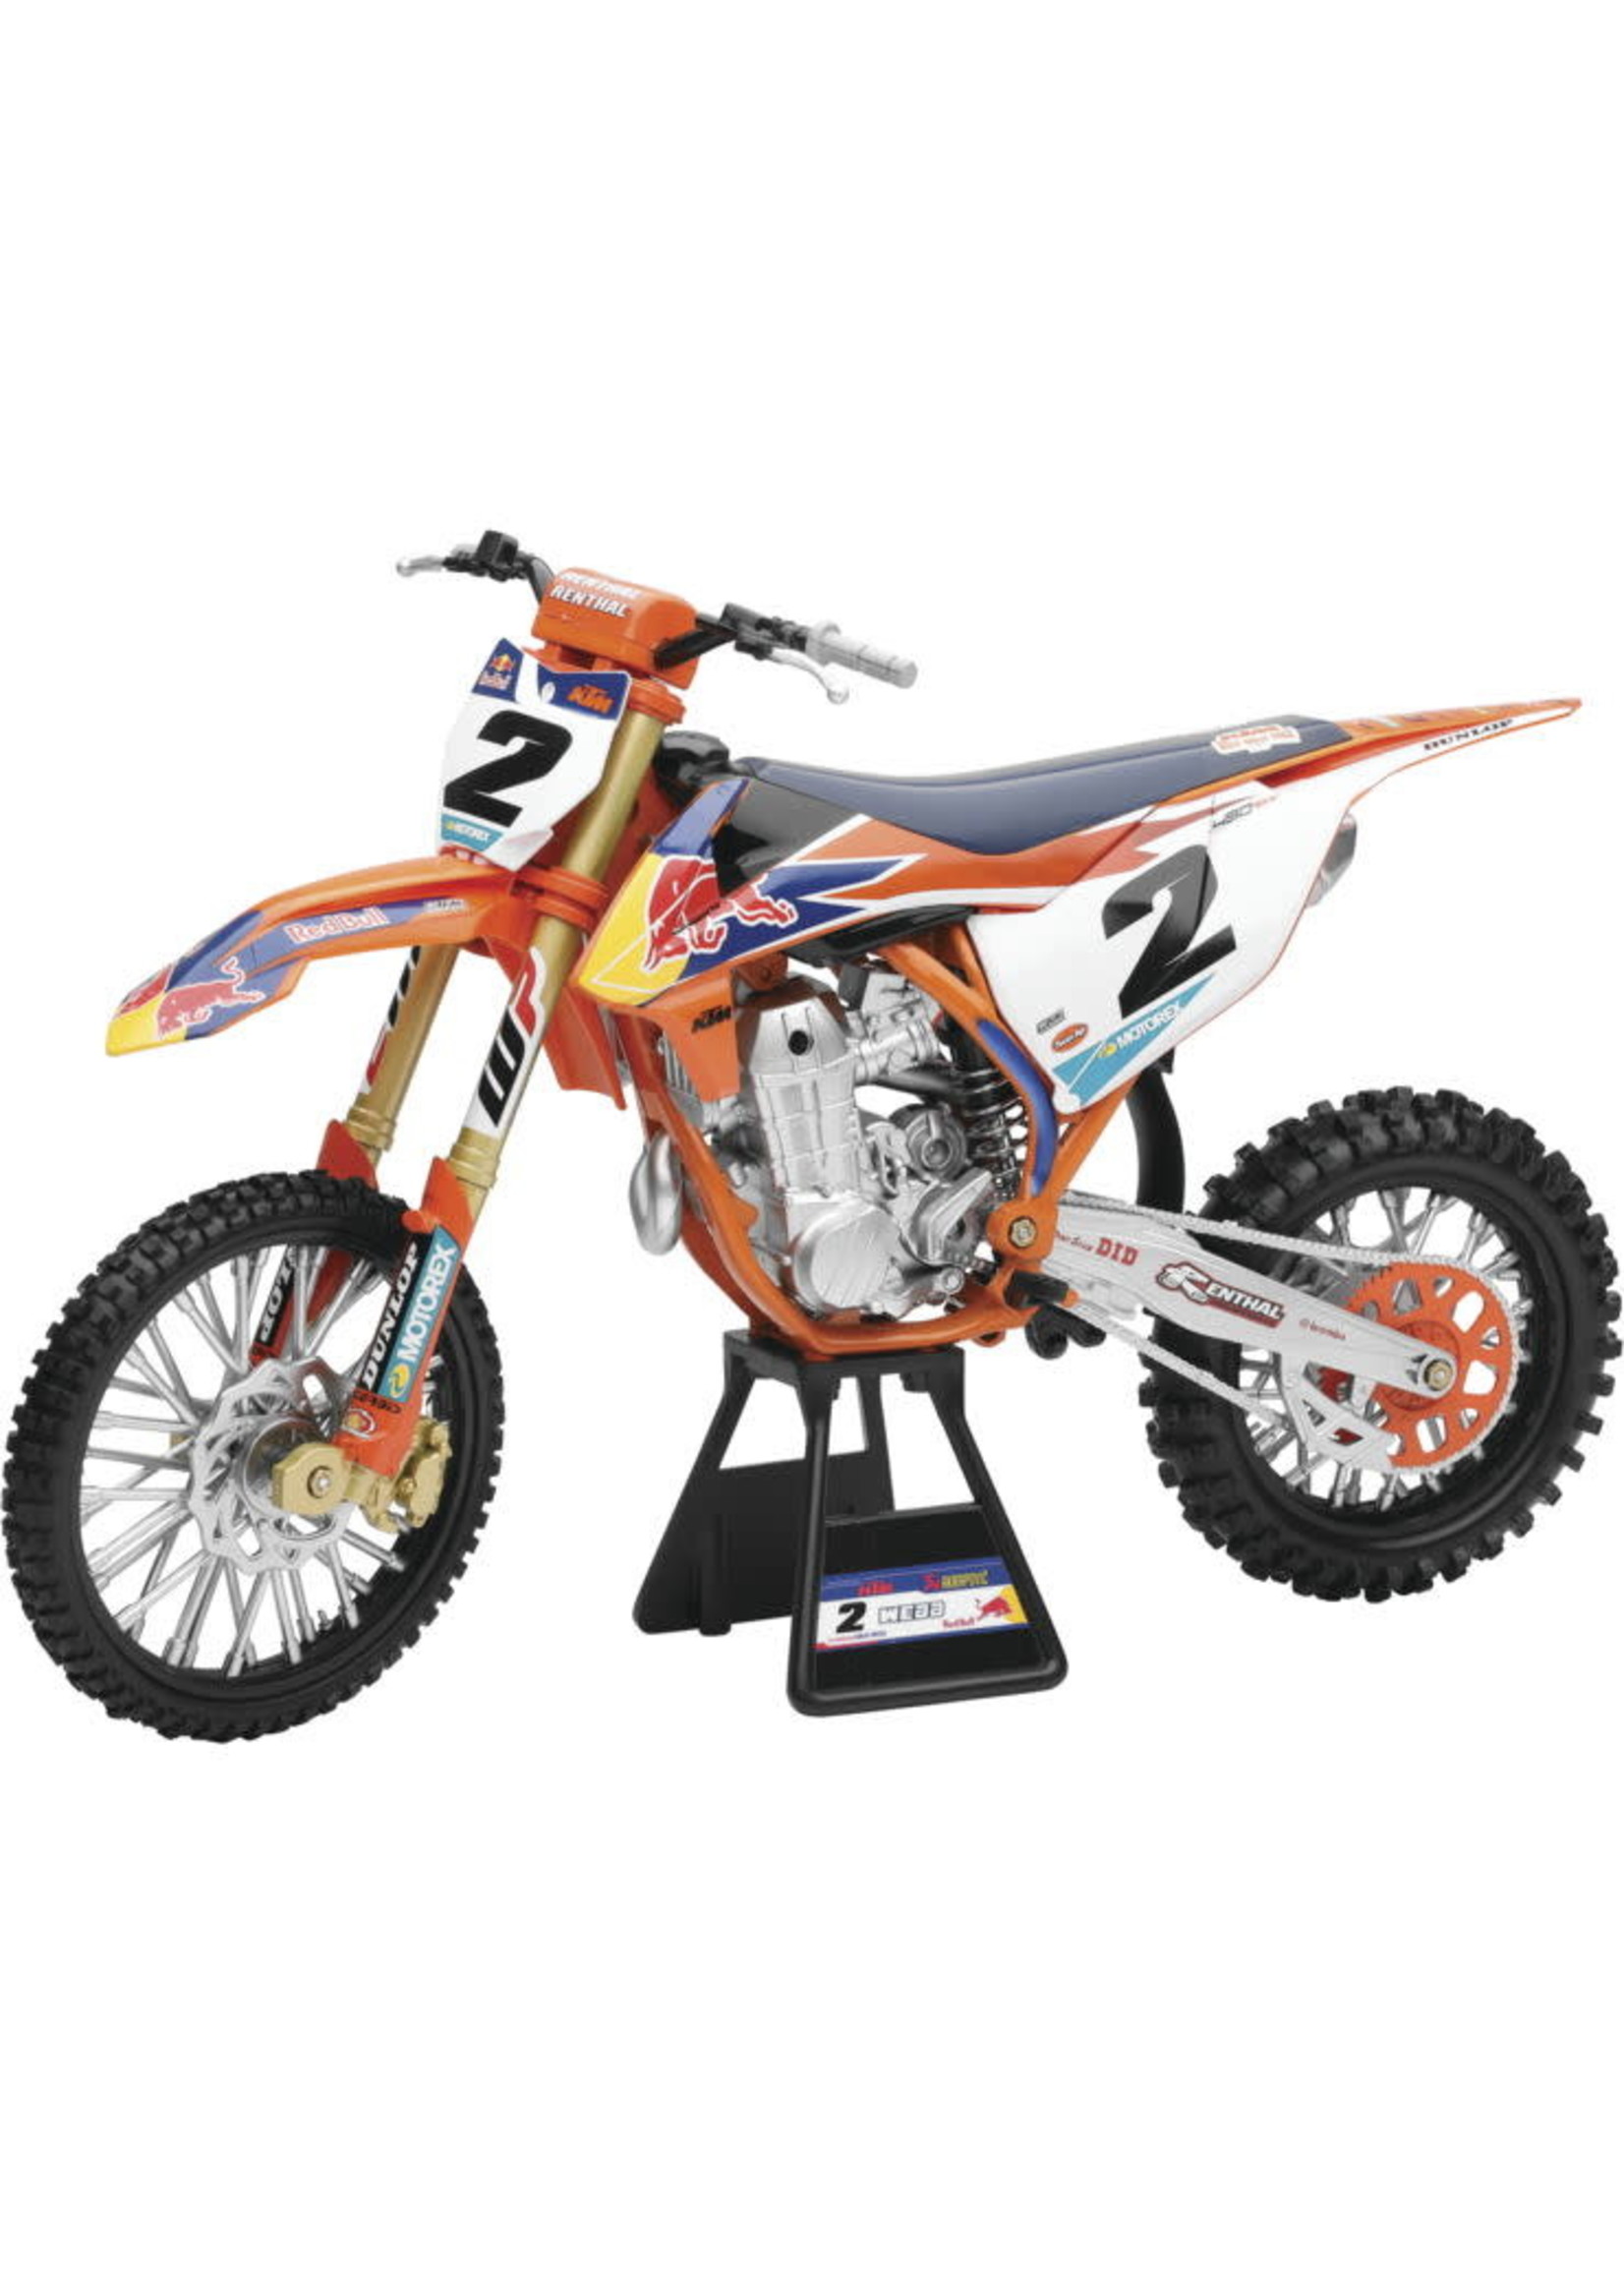 New Ray Toys 1:6 Scale Offroad Racer Replicas KTM Red Bull 450SX-F Cooper Web